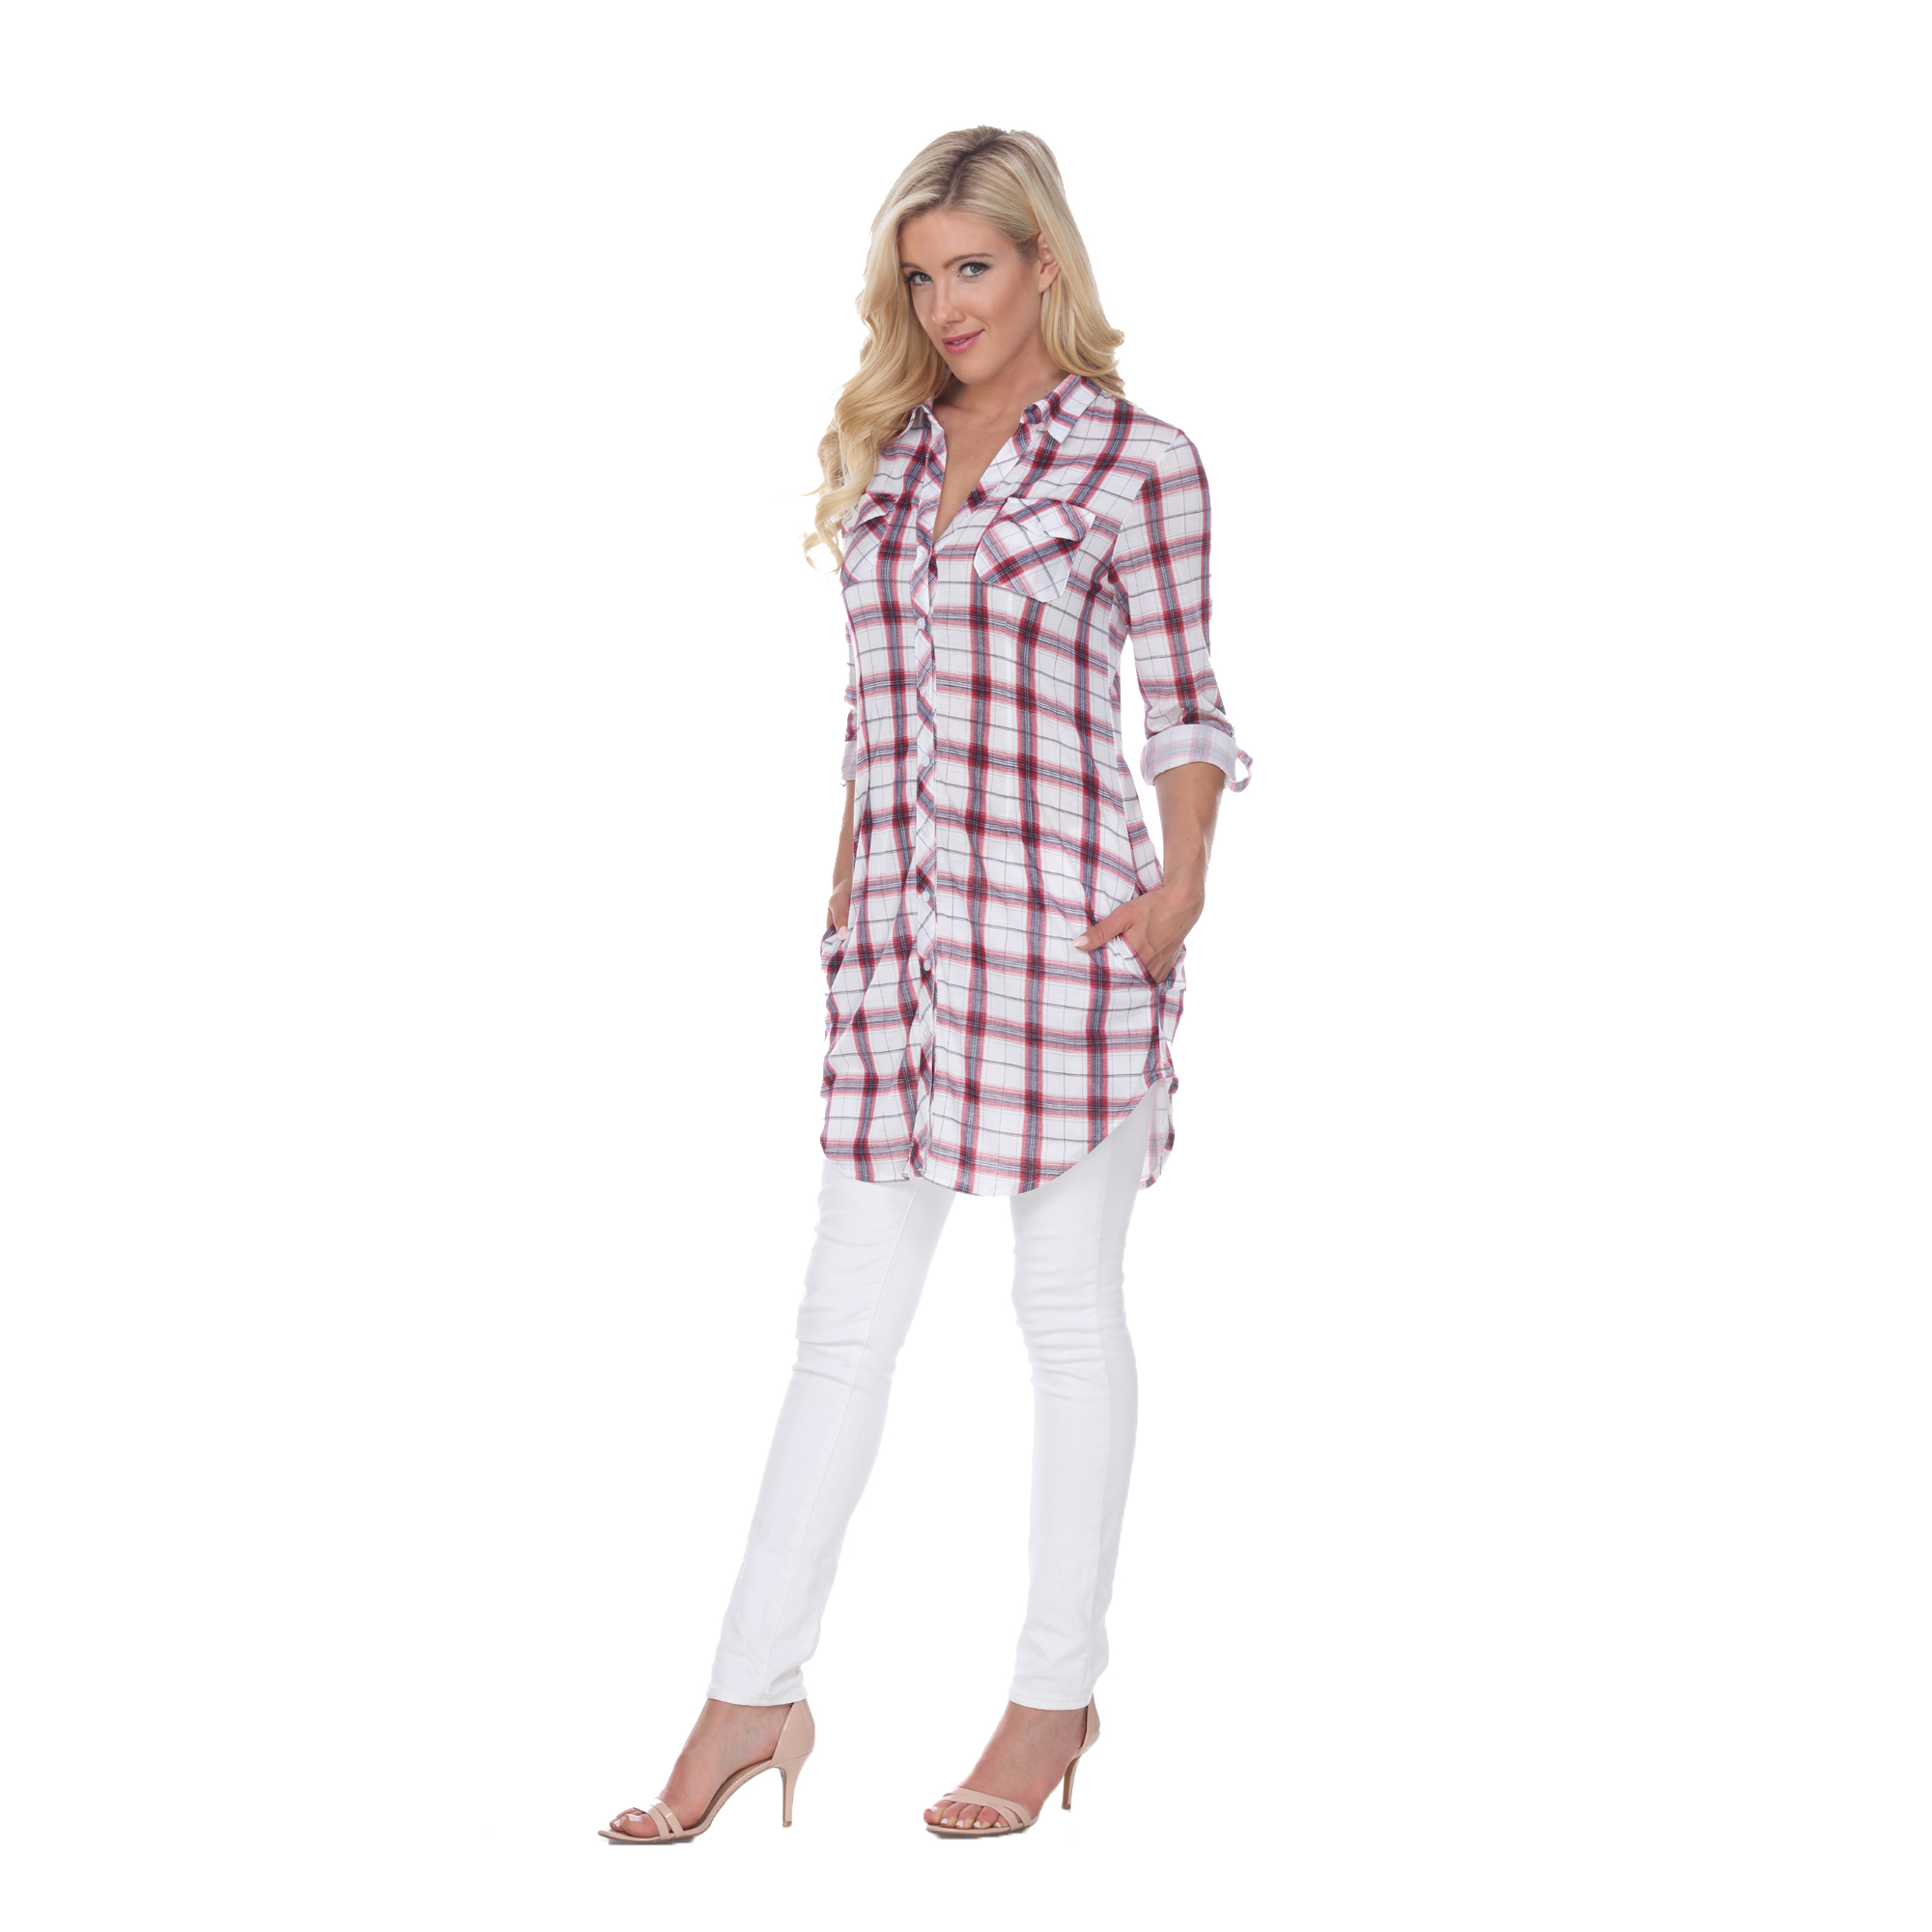 White Mark Women's Stretchy Plaid Flannel Tunic Top - Red/White, 1X